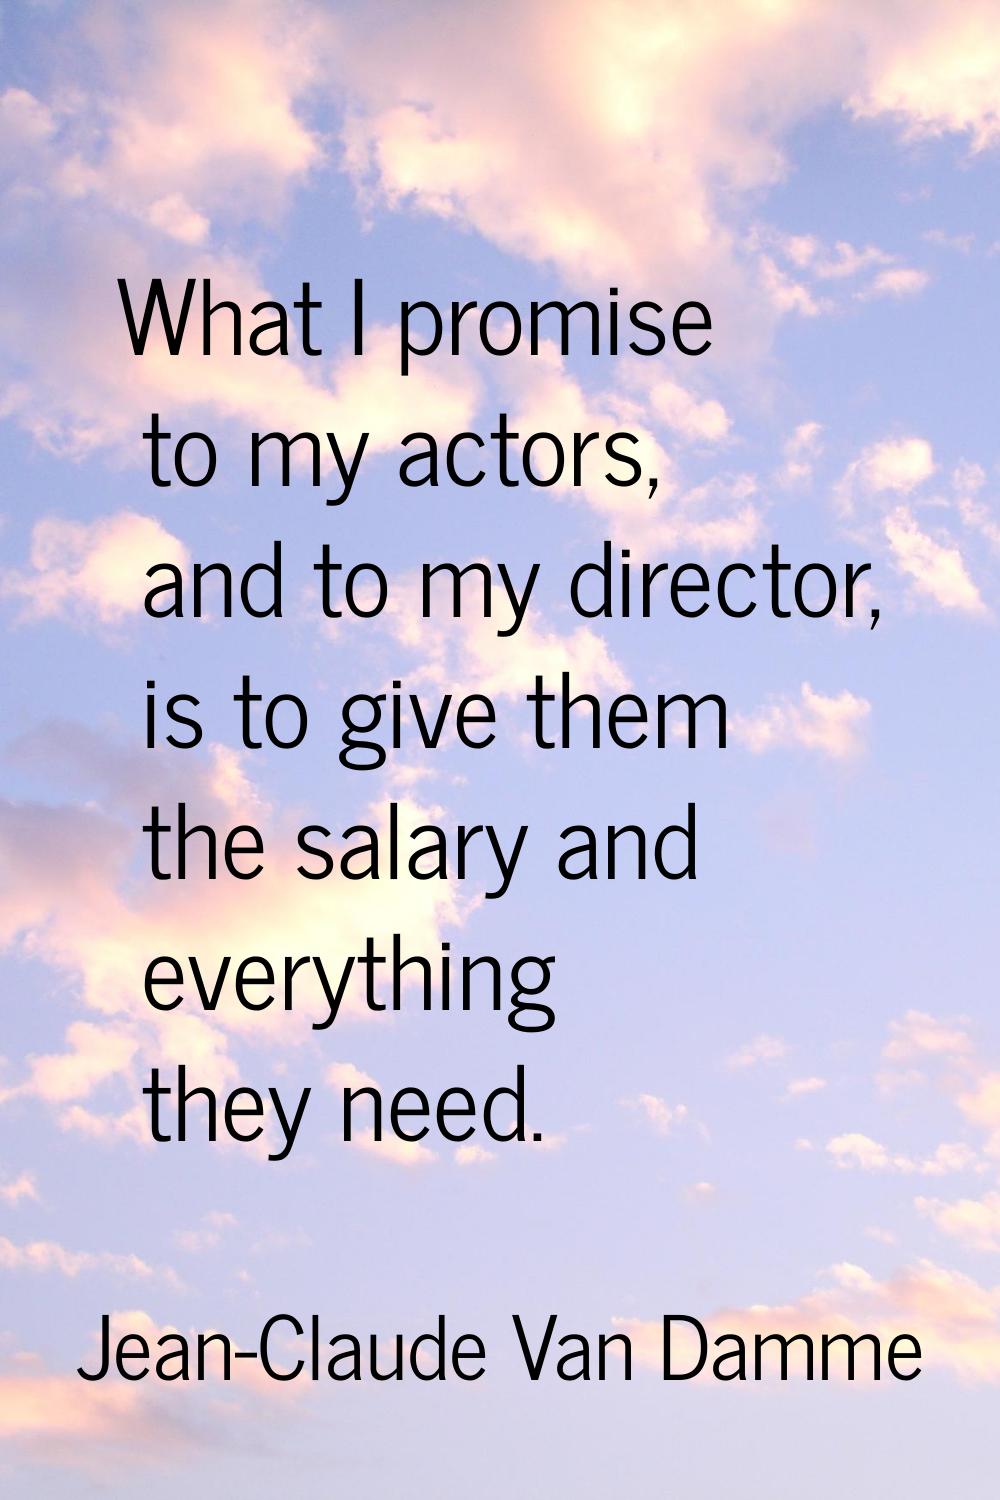 What I promise to my actors, and to my director, is to give them the salary and everything they nee